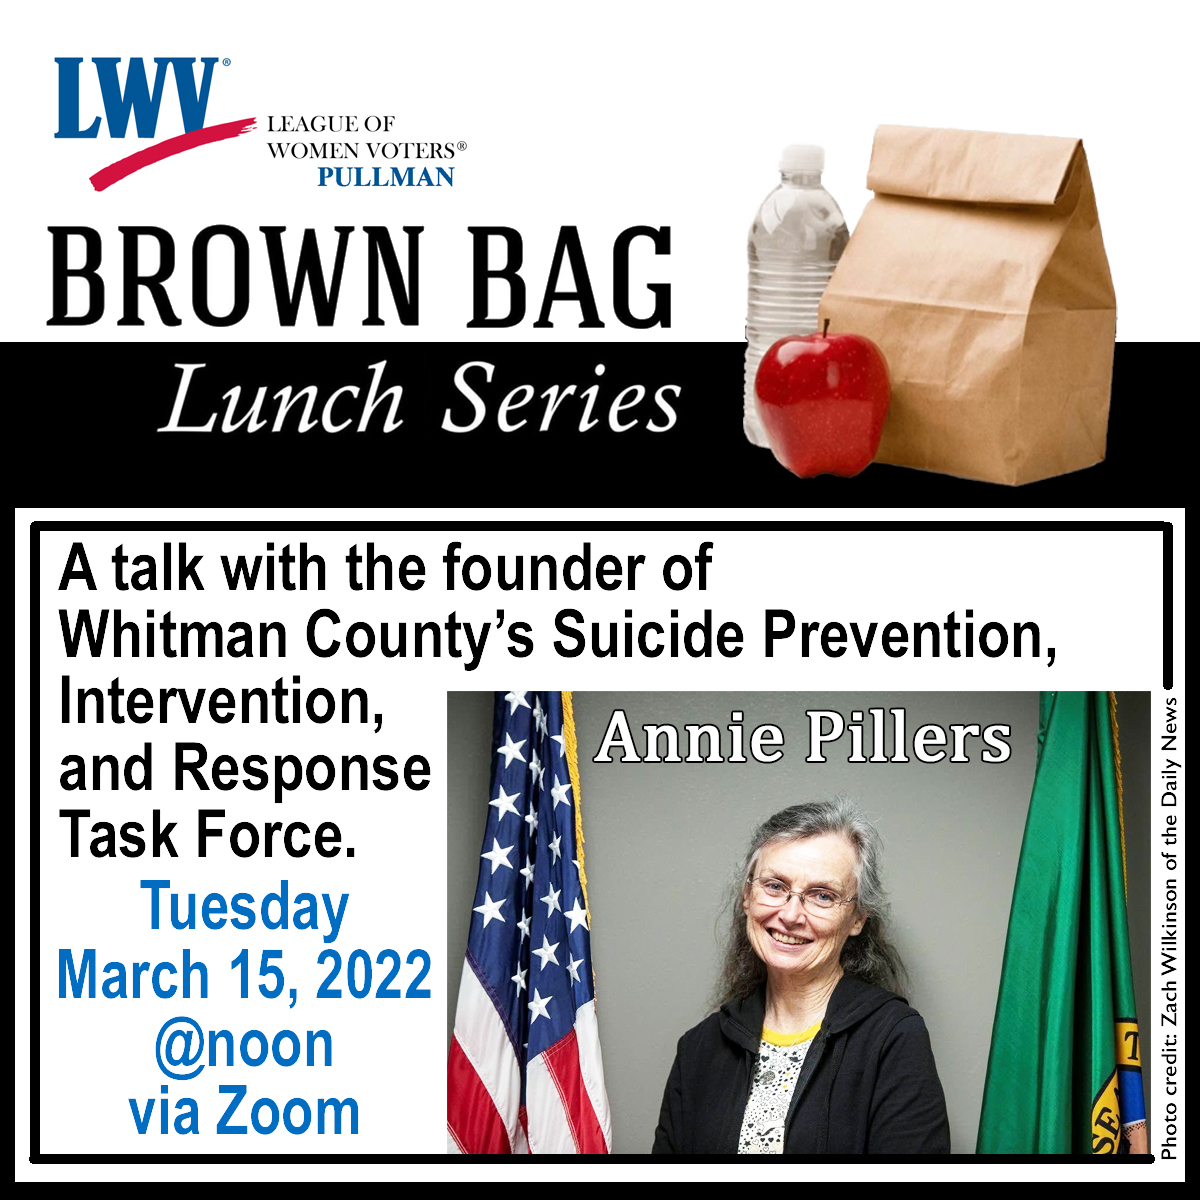 LWV of Pullman brown bag lunch series talk with Annie Pillers, the founder of Whitman County’s Suicide Prevention, Intervention, and Response Task Force. Zoom meeting March 15, 2022 at noon.